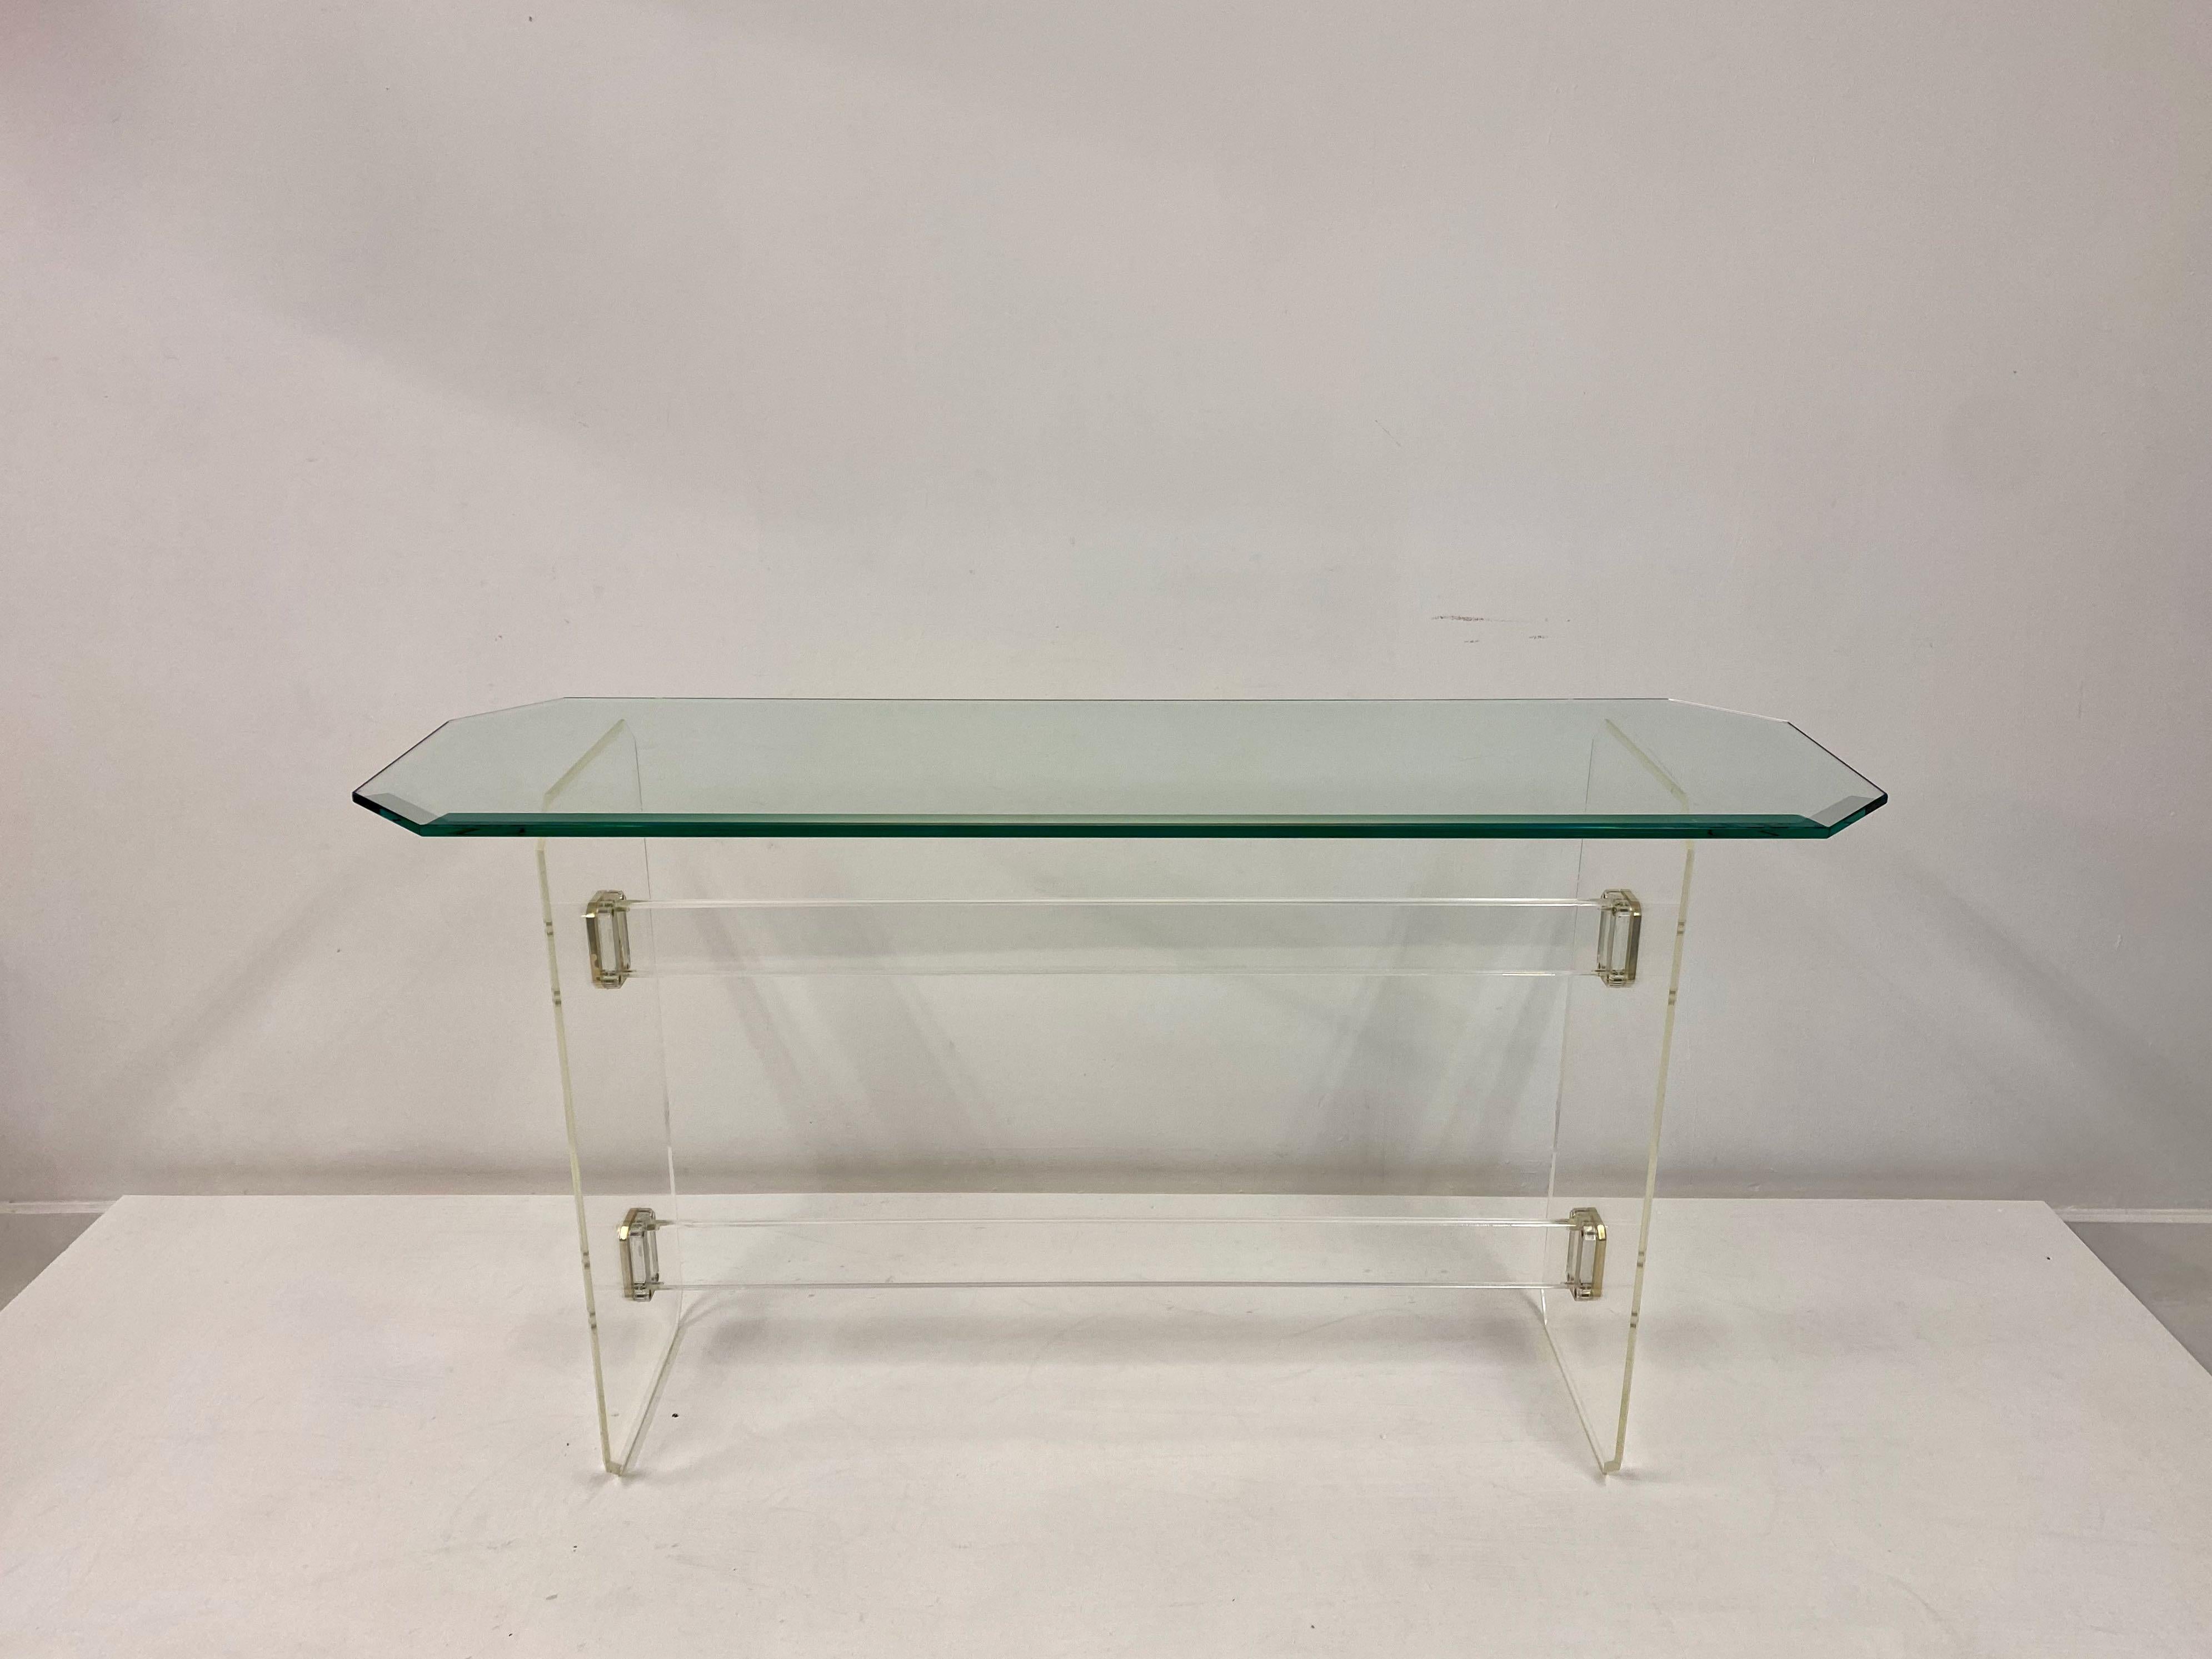 Lucite console table

Glass top

Brass plated nickel side fastenings

Shaped bevelled glass 

Probably French, 1980s.